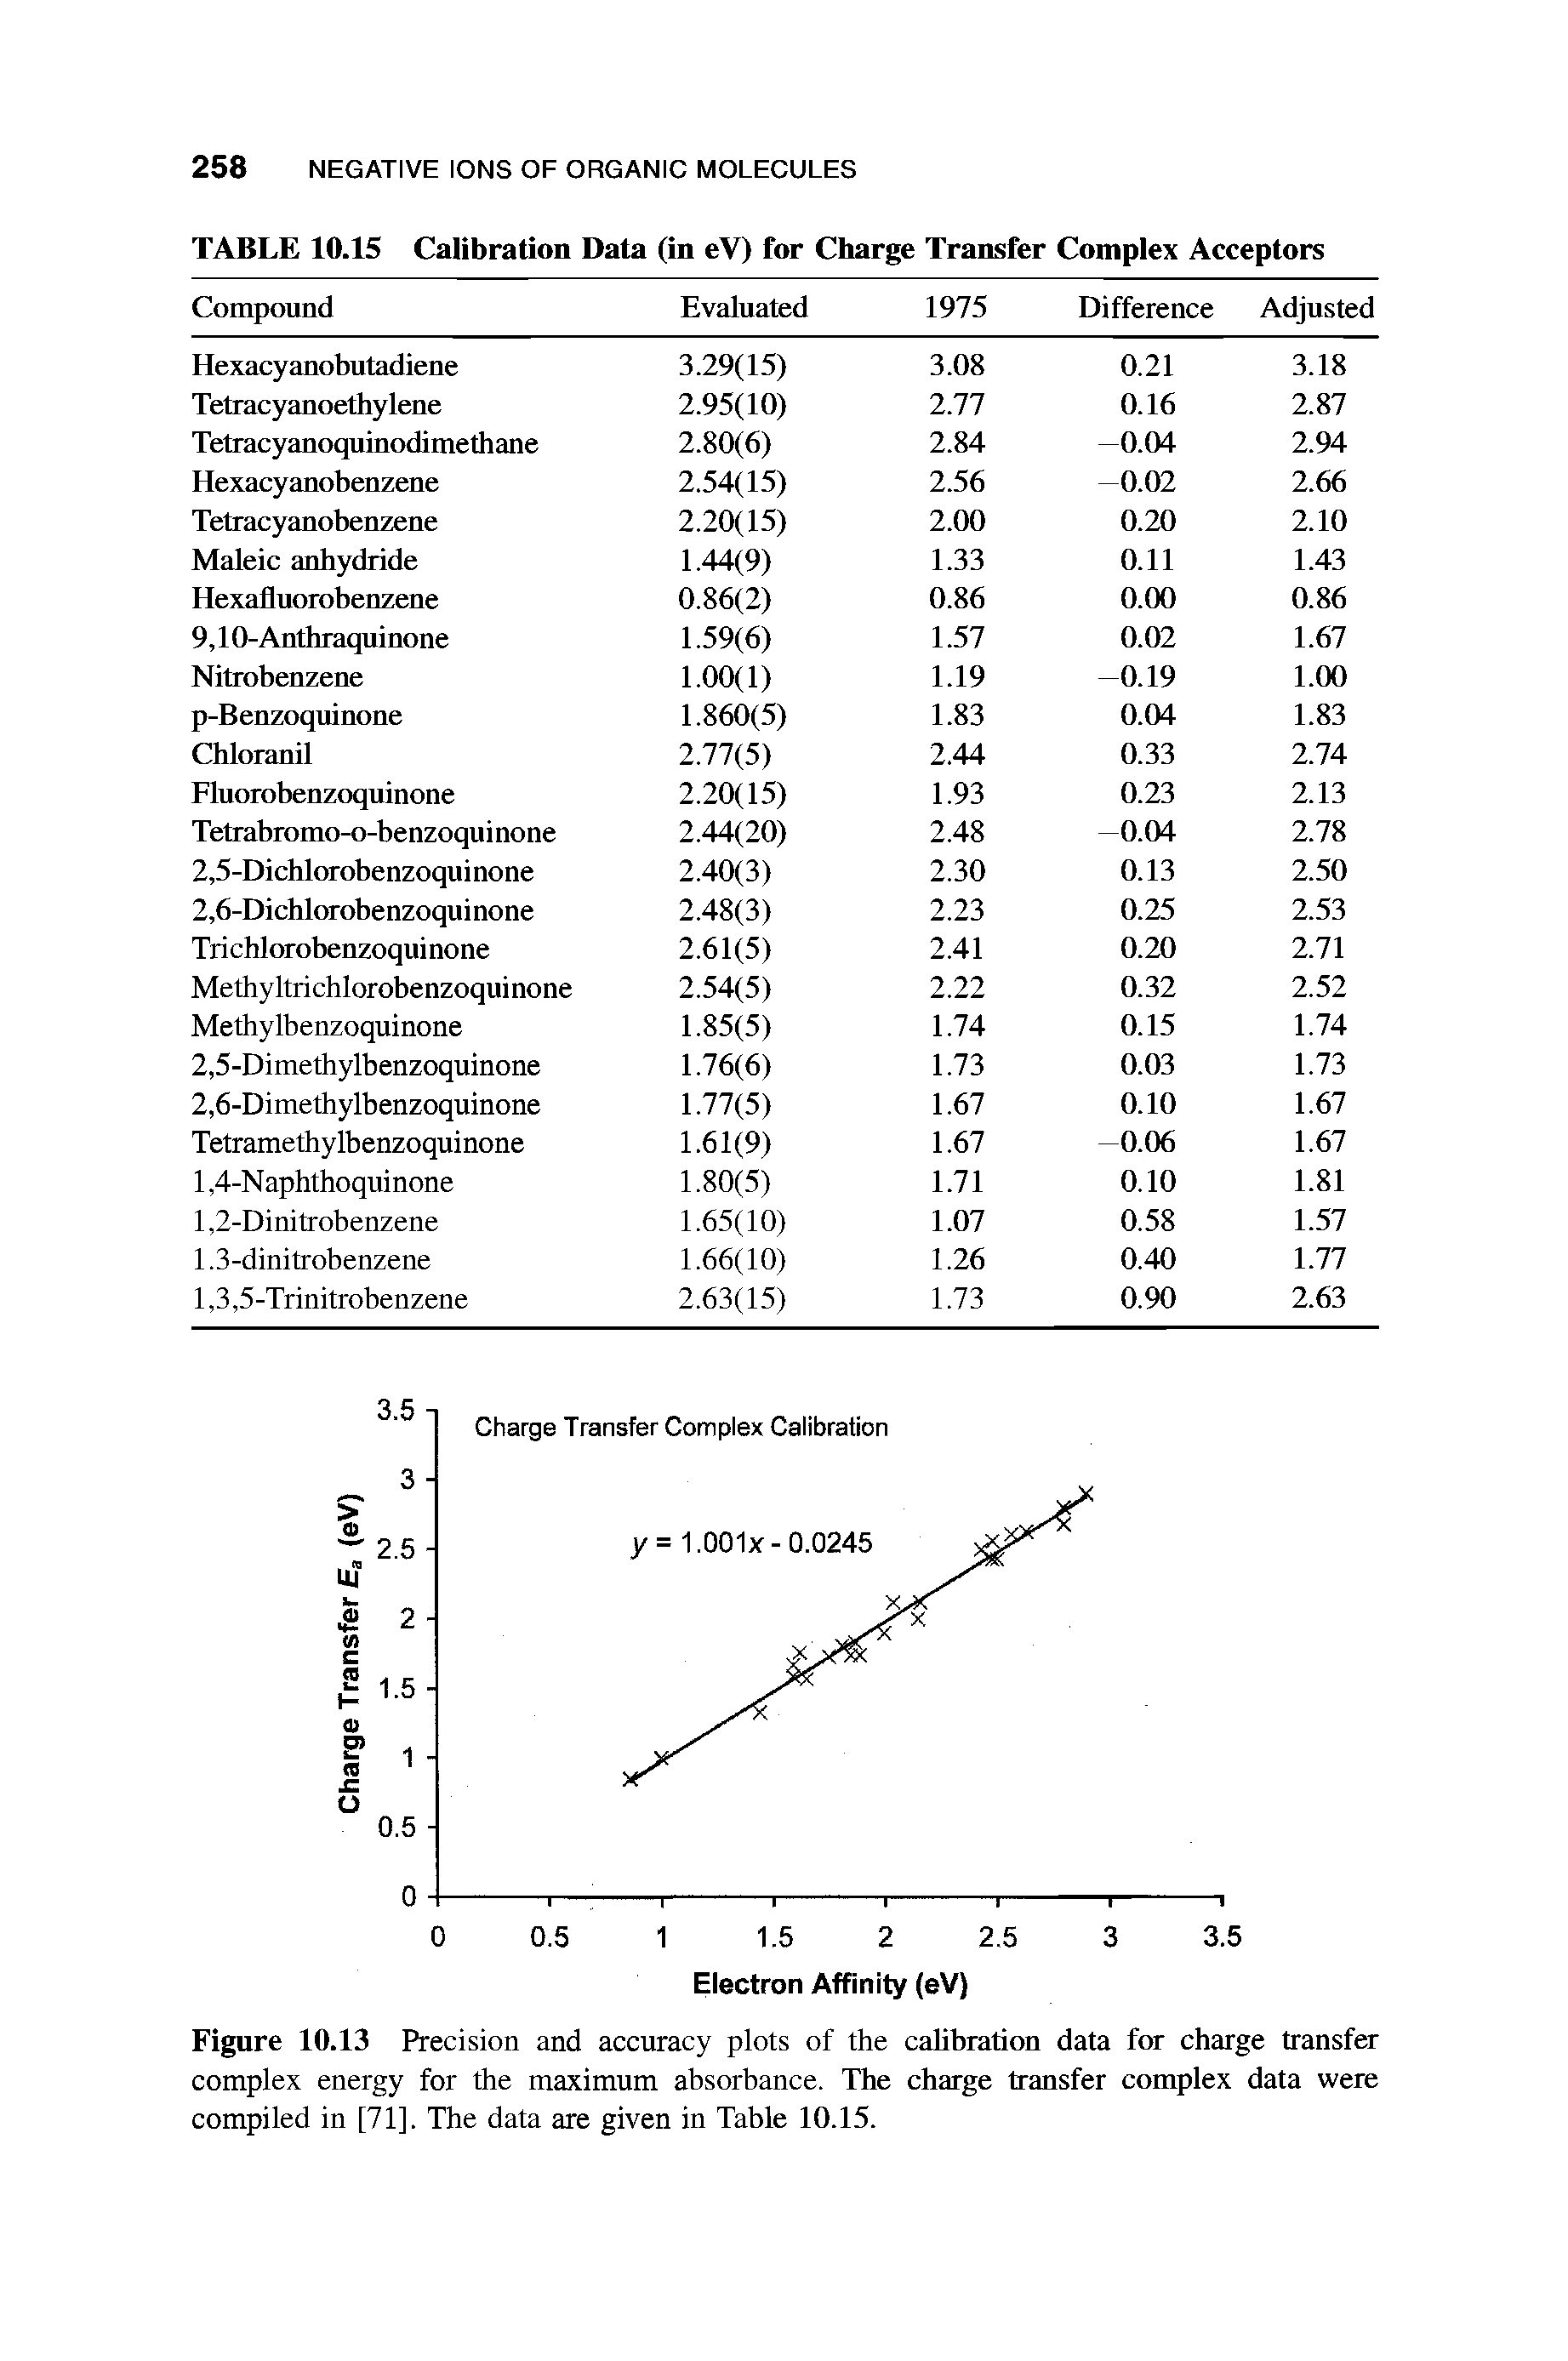 Figure 10.13 Precision and accuracy plots of the calibration data for charge transfer complex energy for the maximum absorbance. The charge transfer complex data were compiled in [71]. The data are given in Table 10.15.